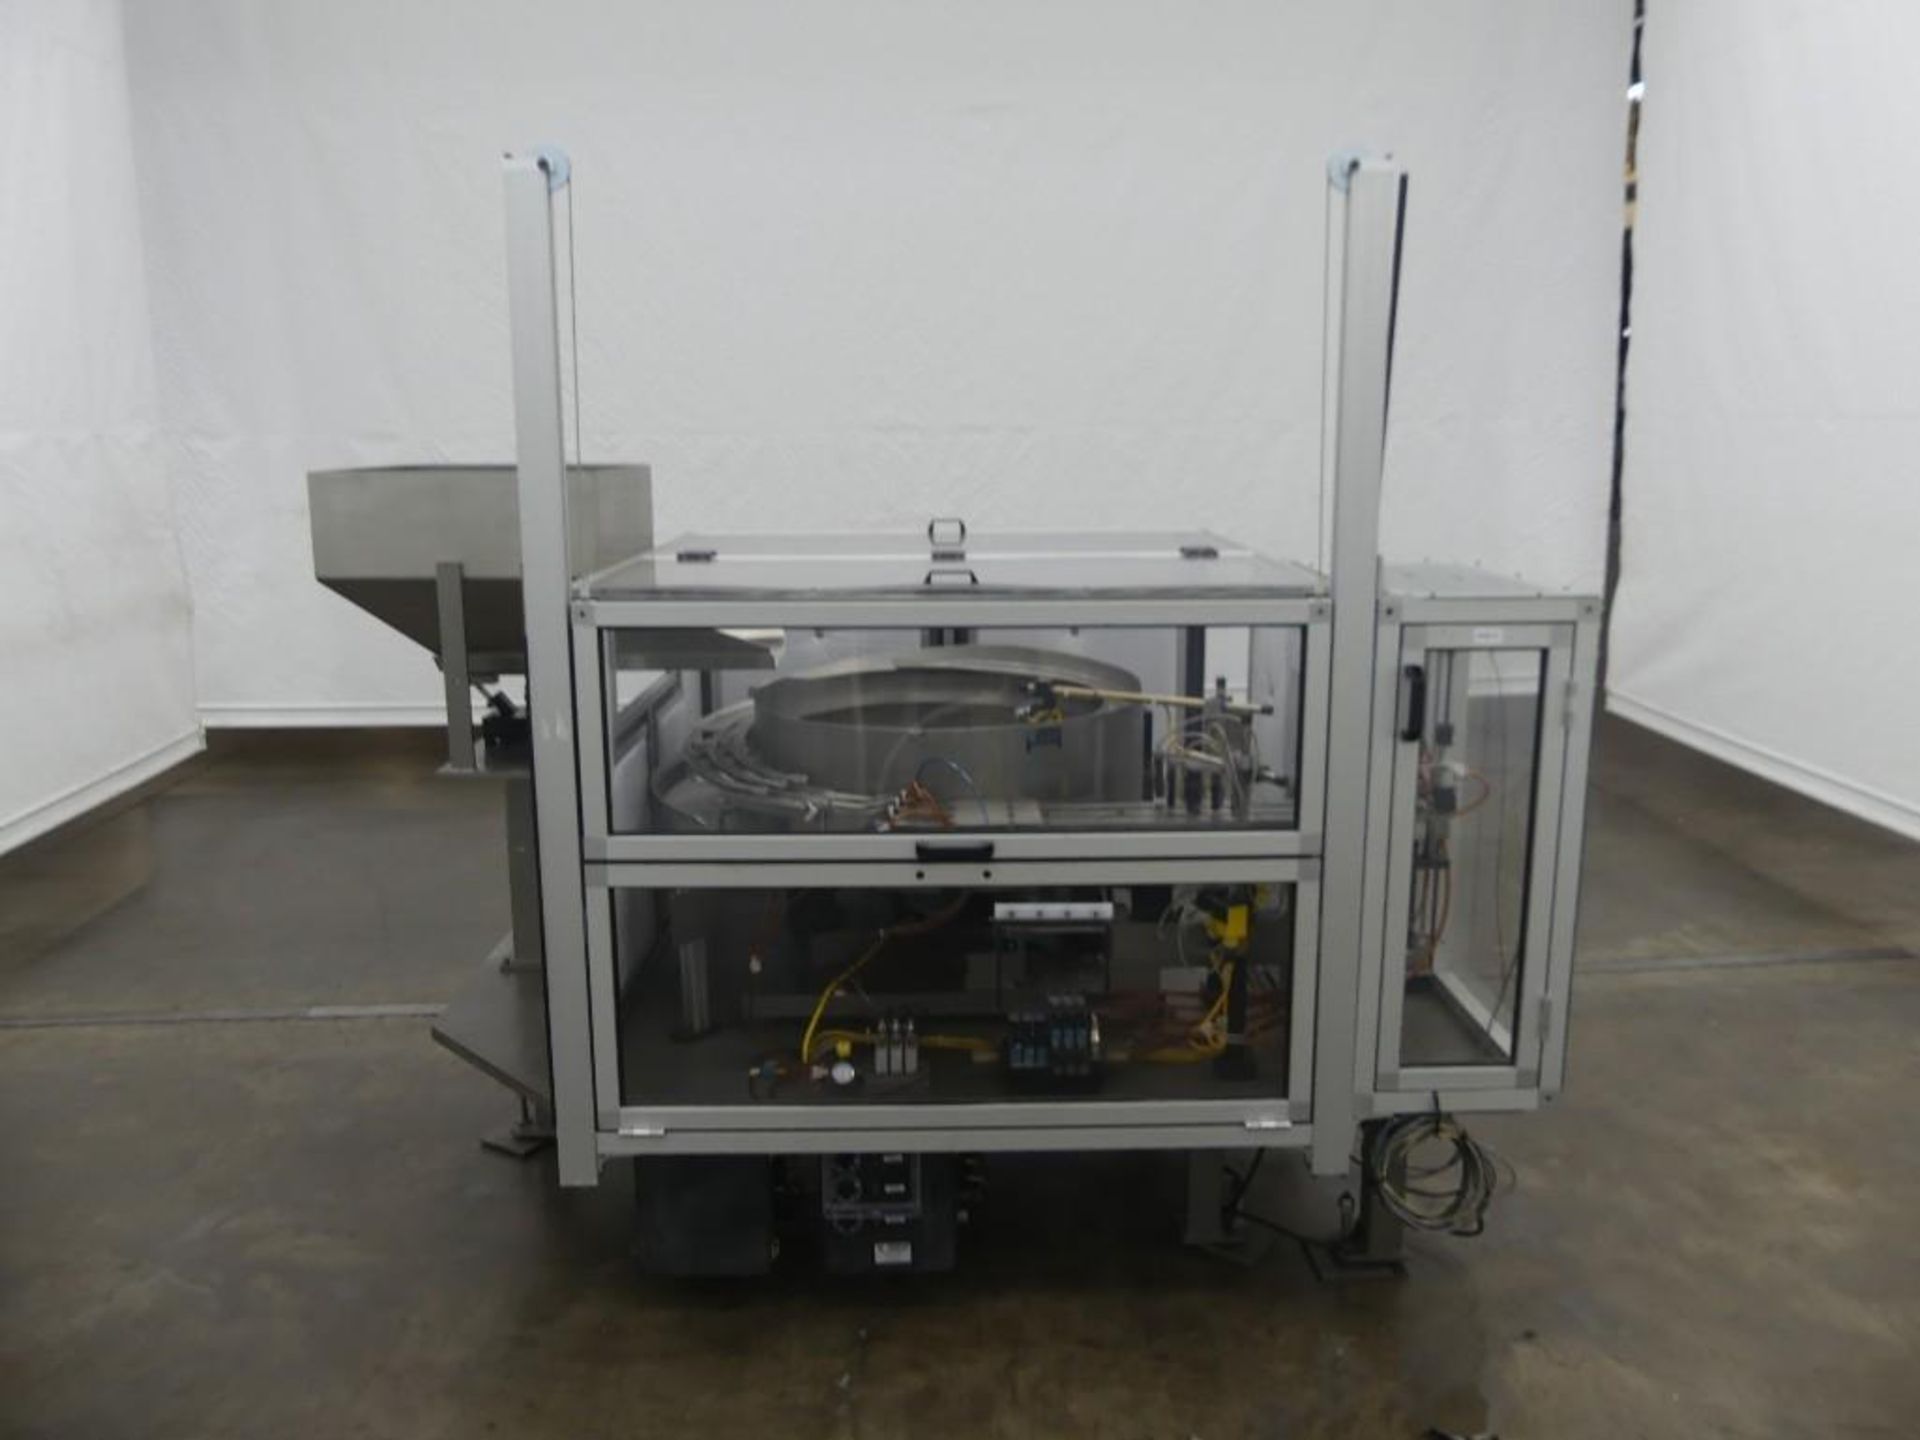 Performance Feeders, Inc. Stainless Steel Vibratory Cap Feeder And Sorter - Image 18 of 25